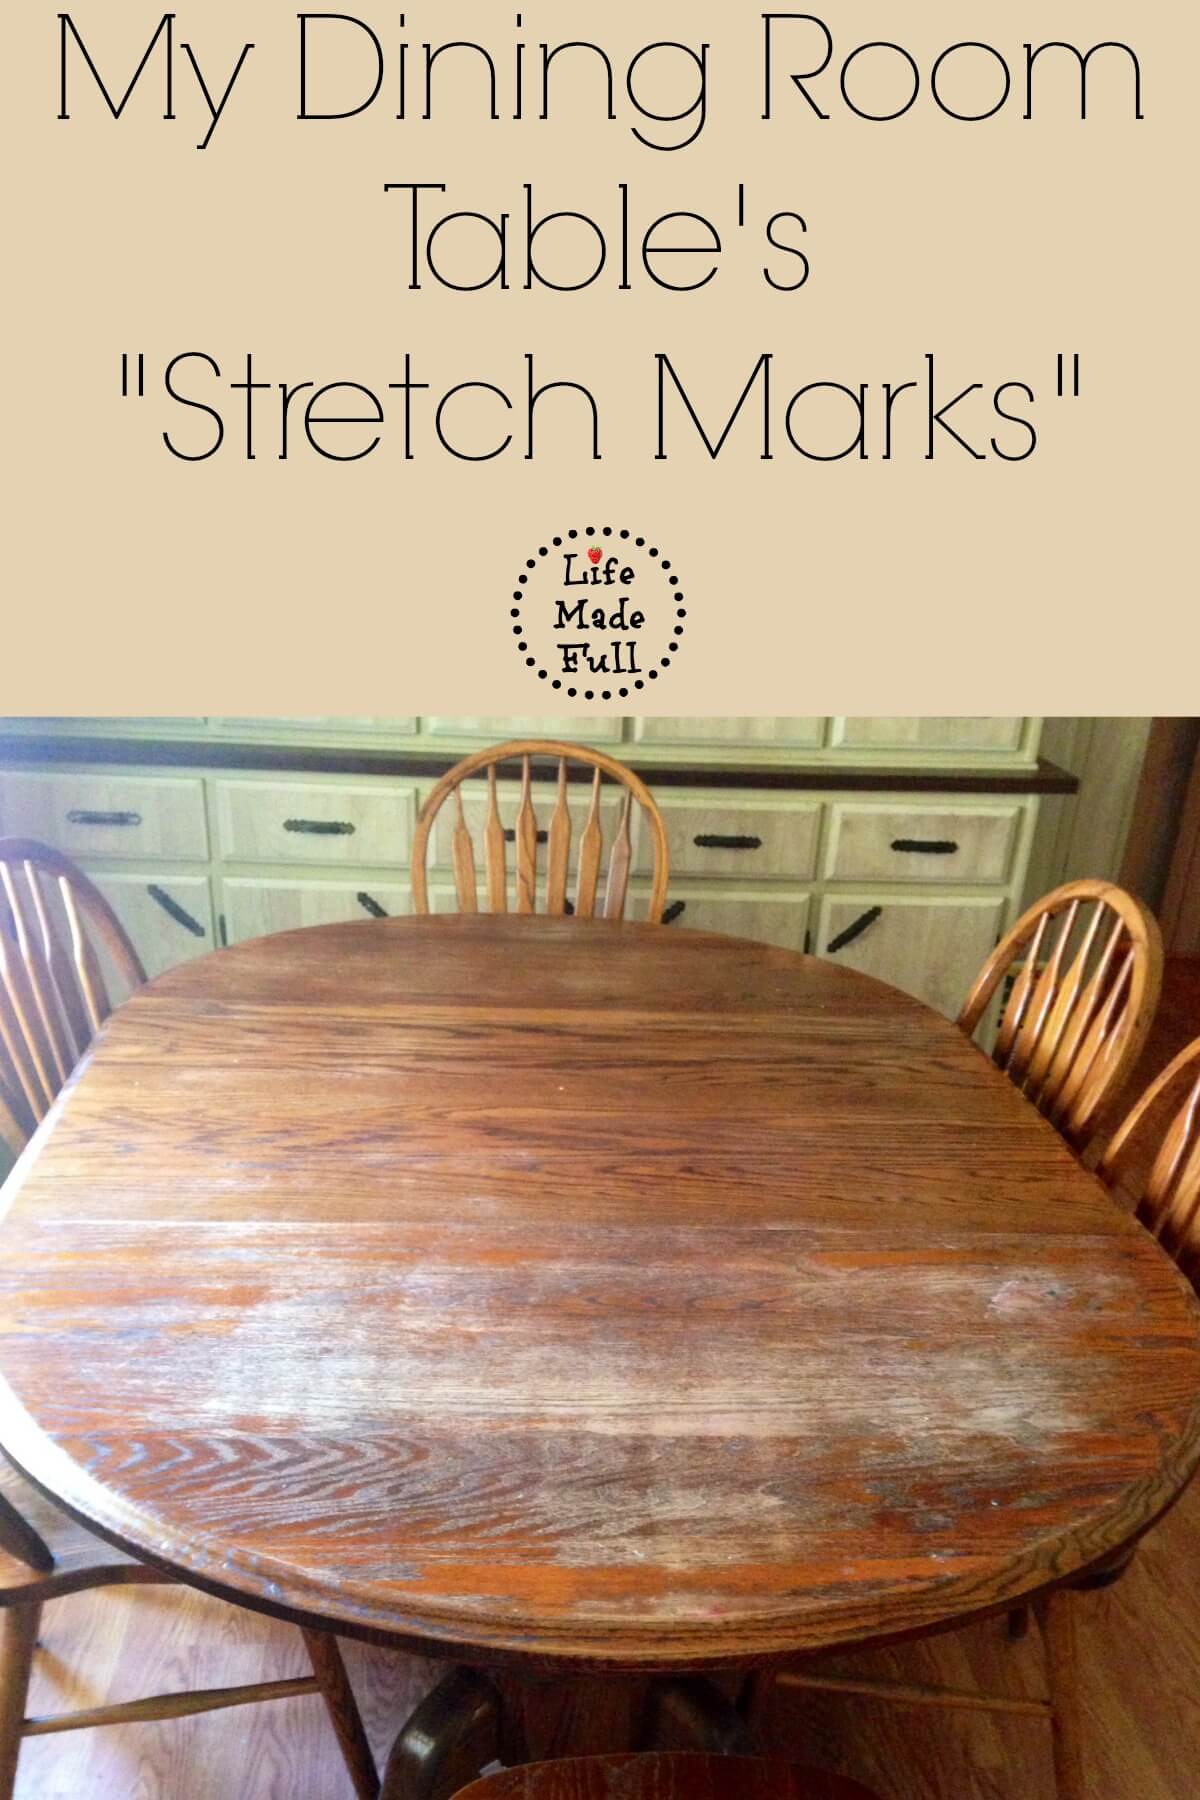 My Dining Room Table’s “Stretch Marks”